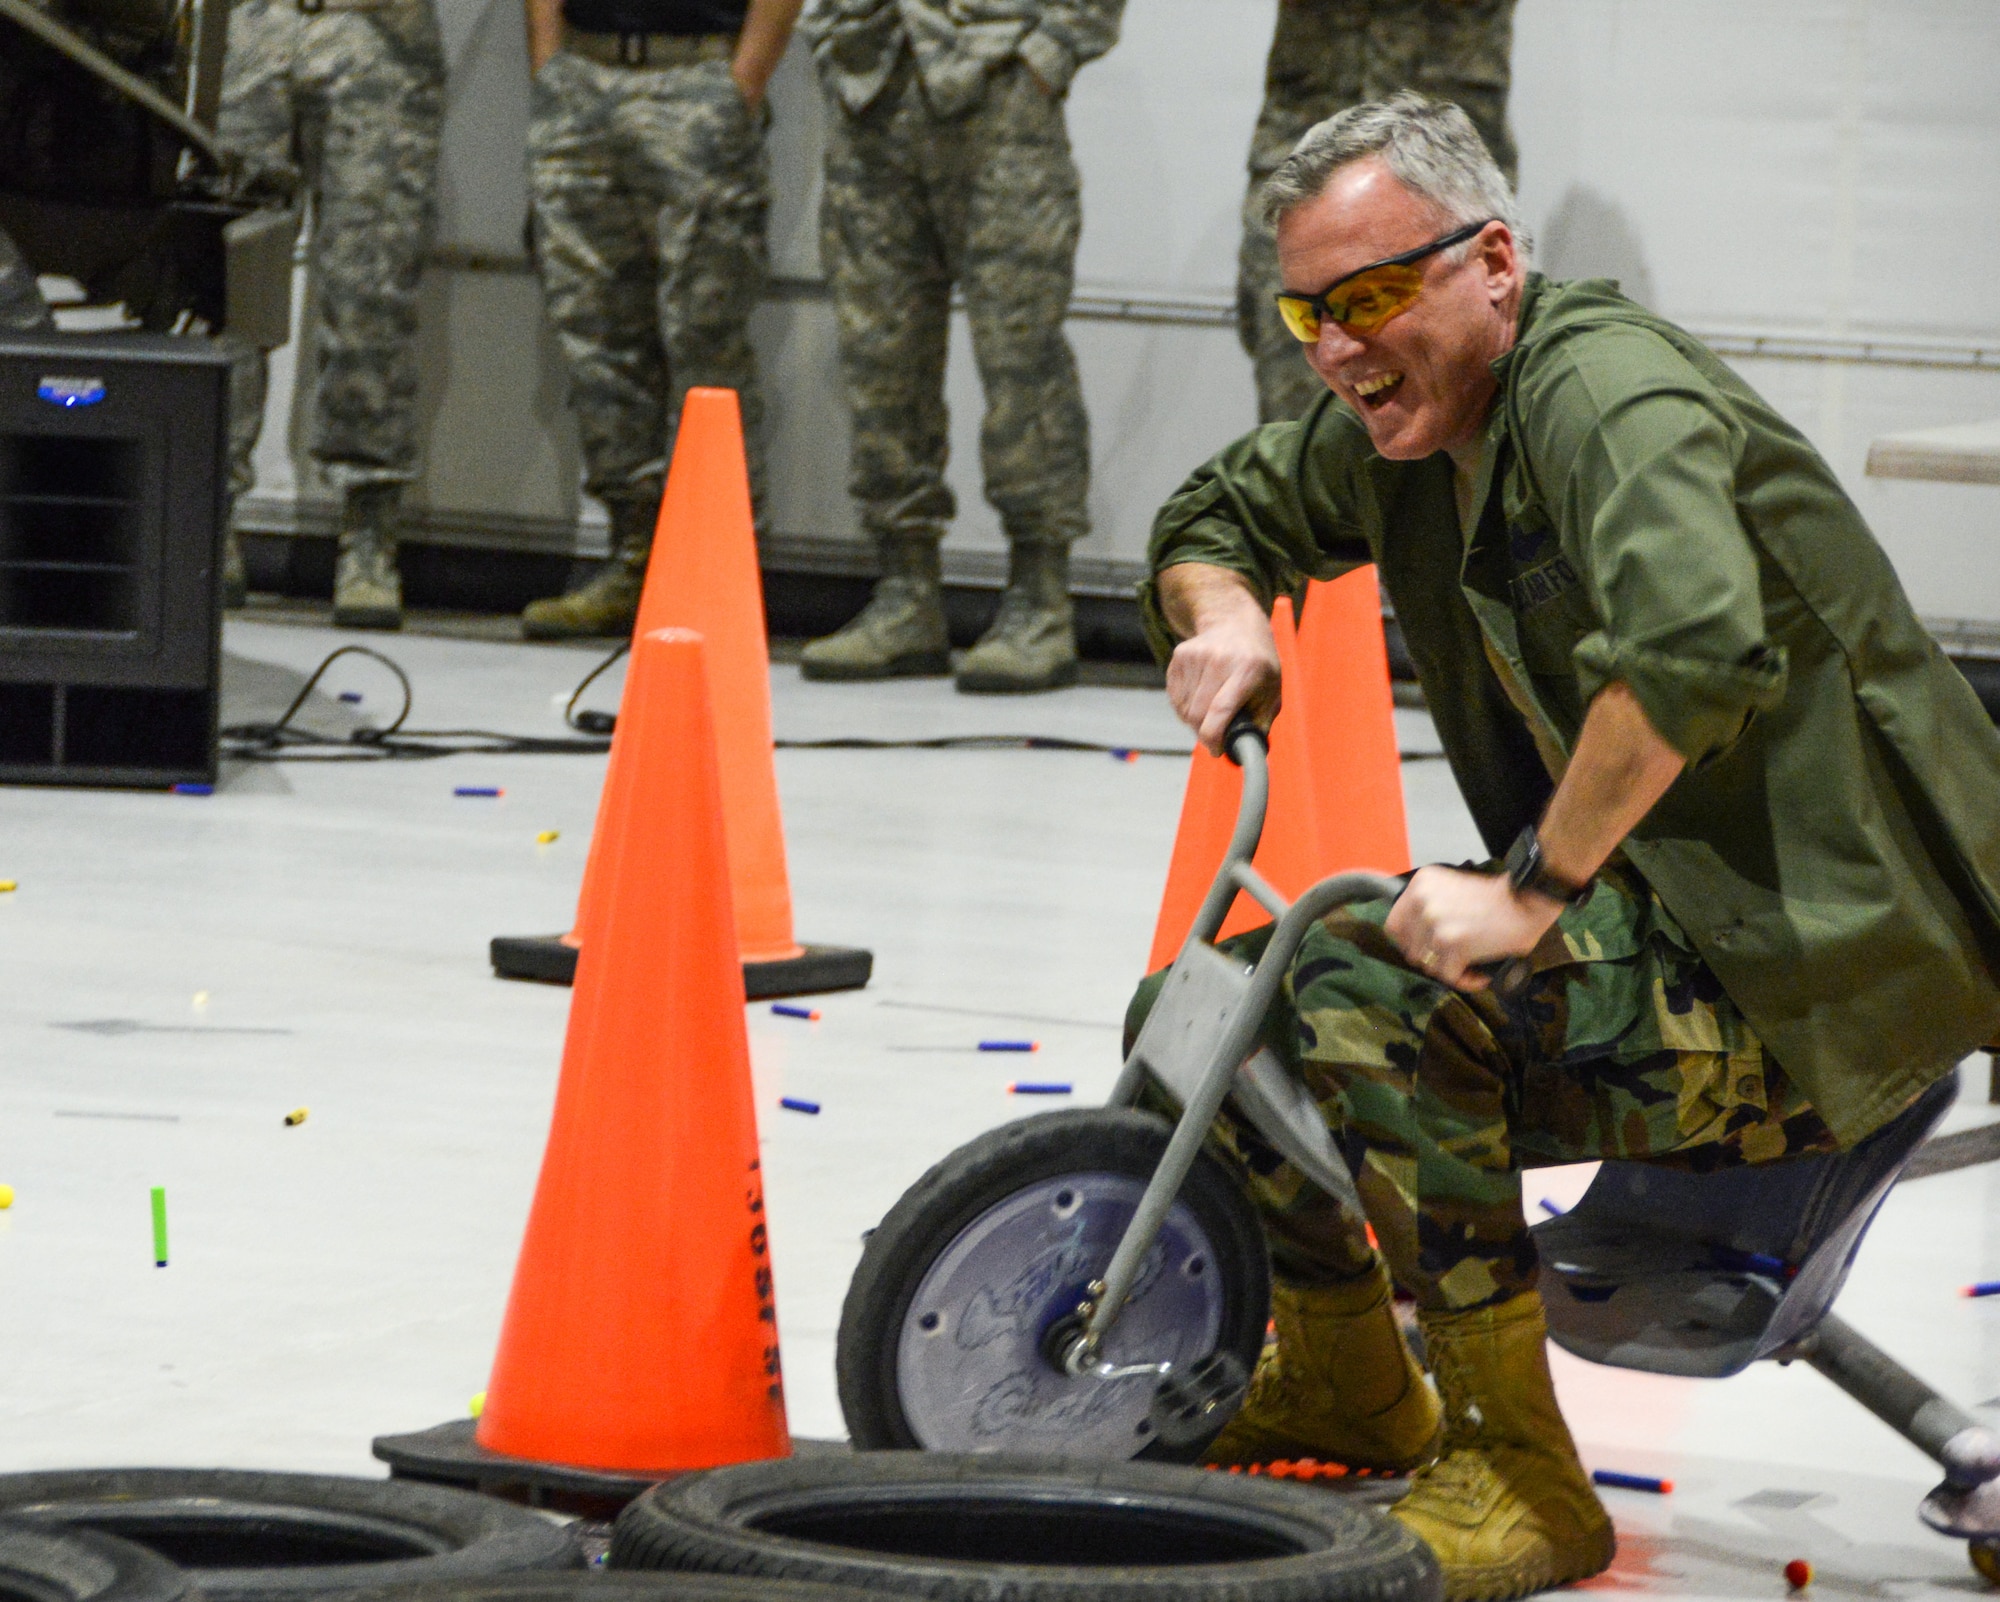 A Texas Air National Guard Colonel dismounts a tricycle on an obstacle course.